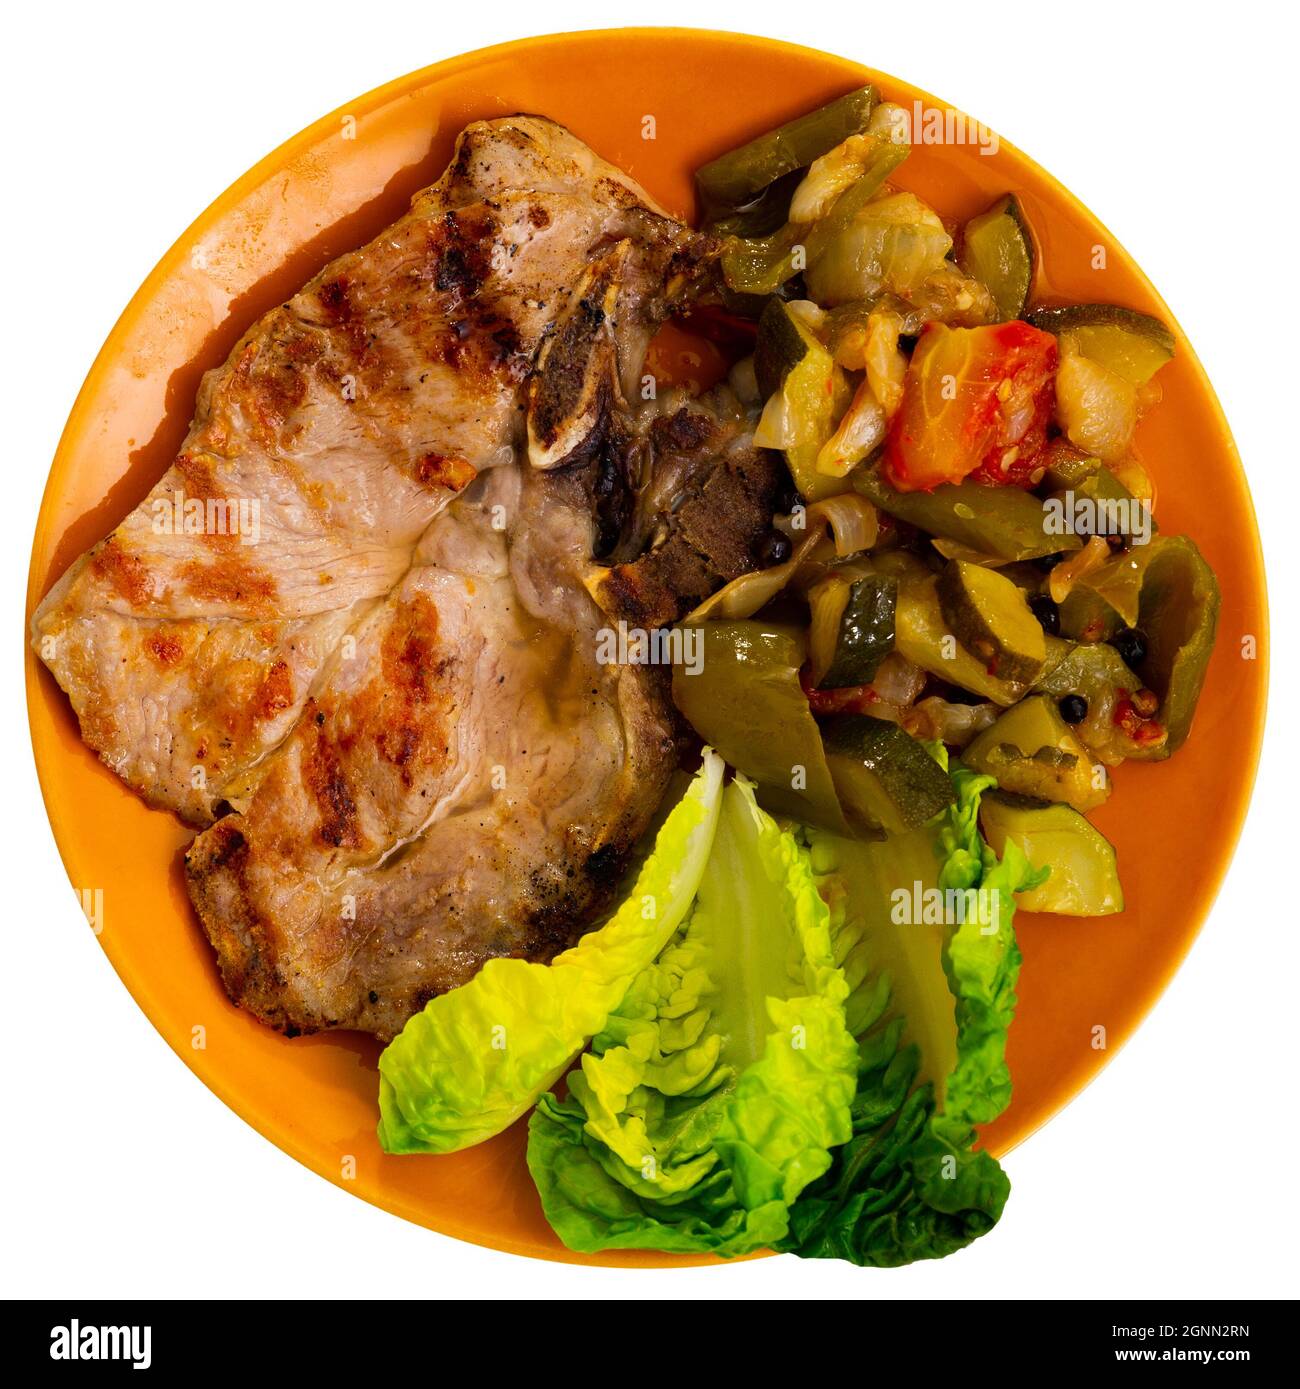 Juicy roast pork on a plate with stewed vegetables Stock Photo